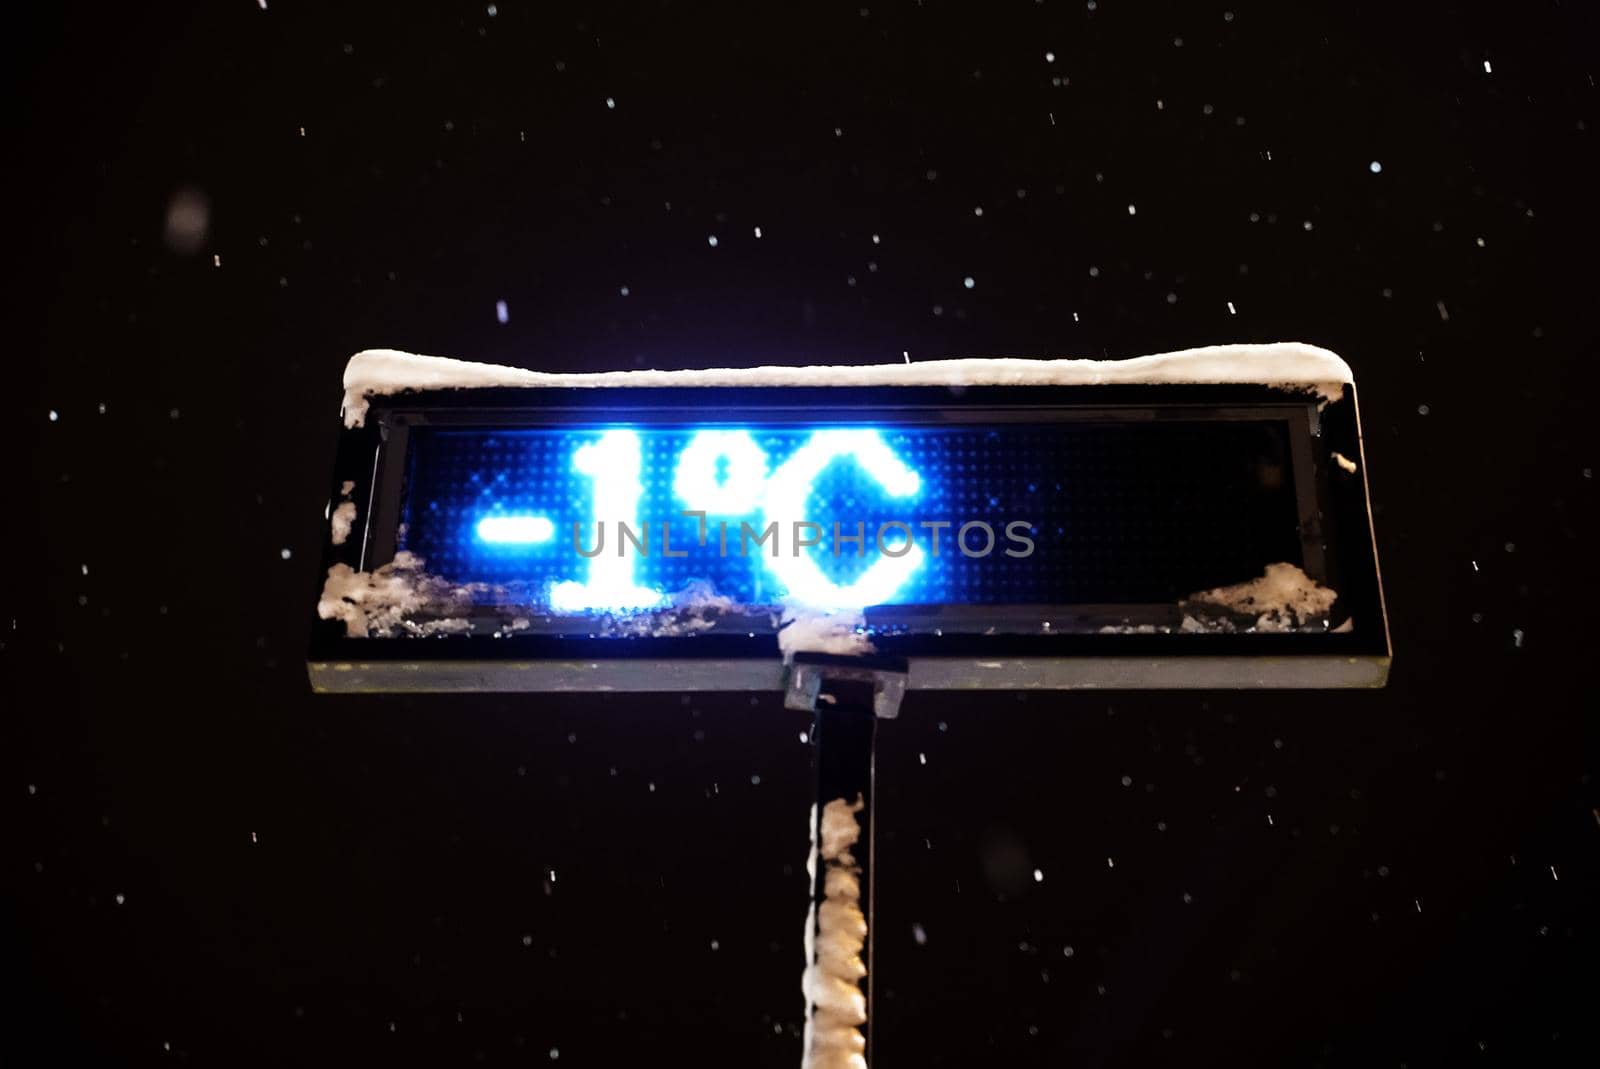 Outdoor thermometer shows a temperature of minus one degree.